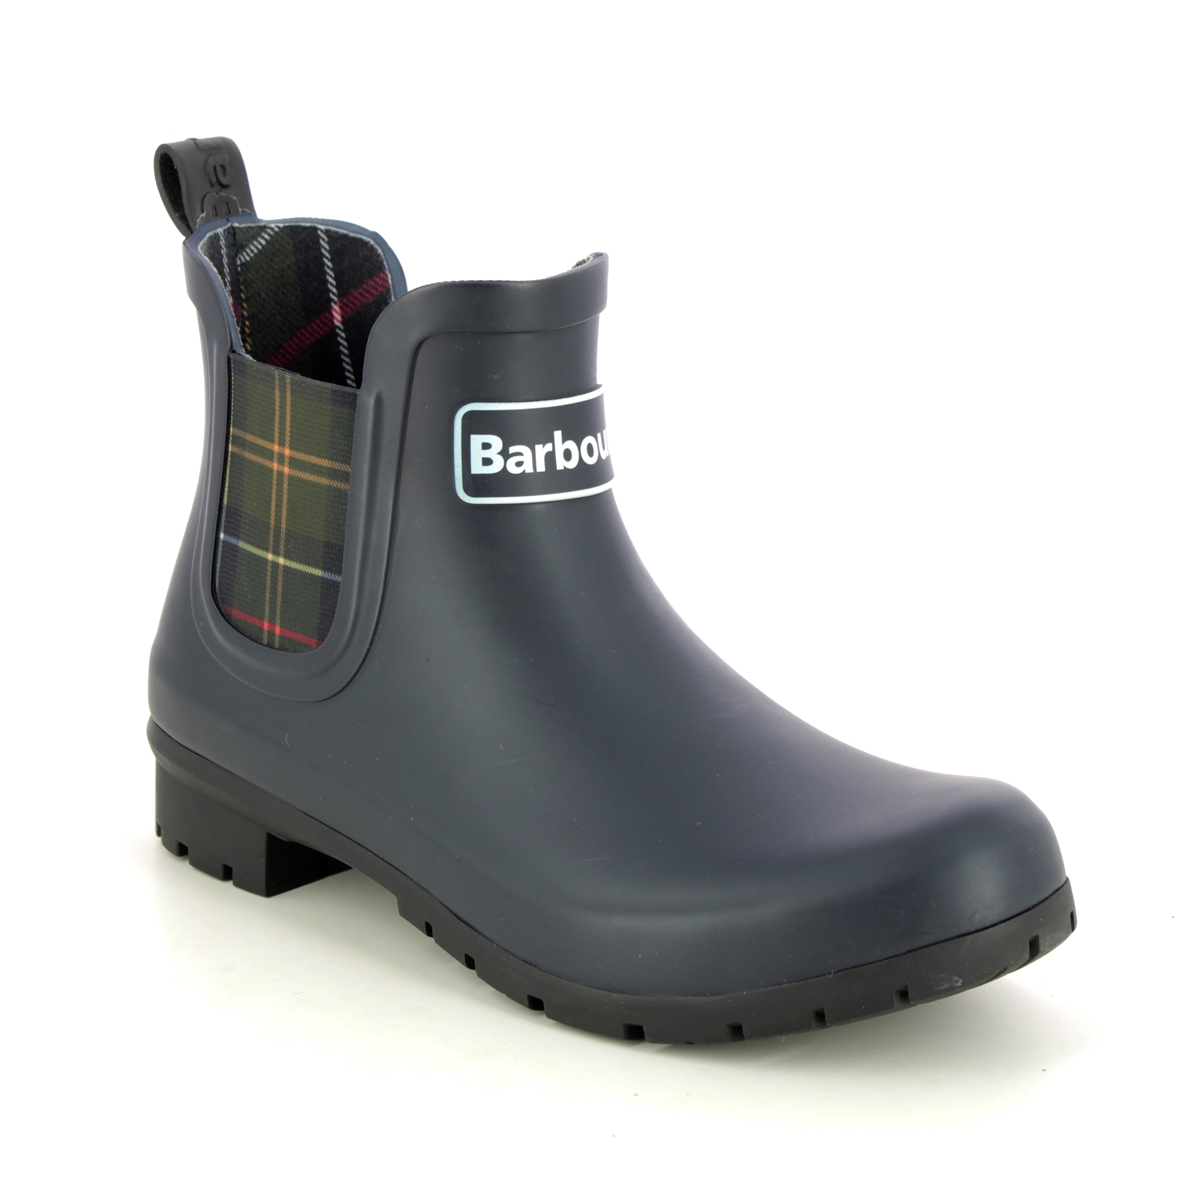 Barbour Kingham Wellie Navy Boots Lrf0088-Ny11 In Size 5 In Plain Navy